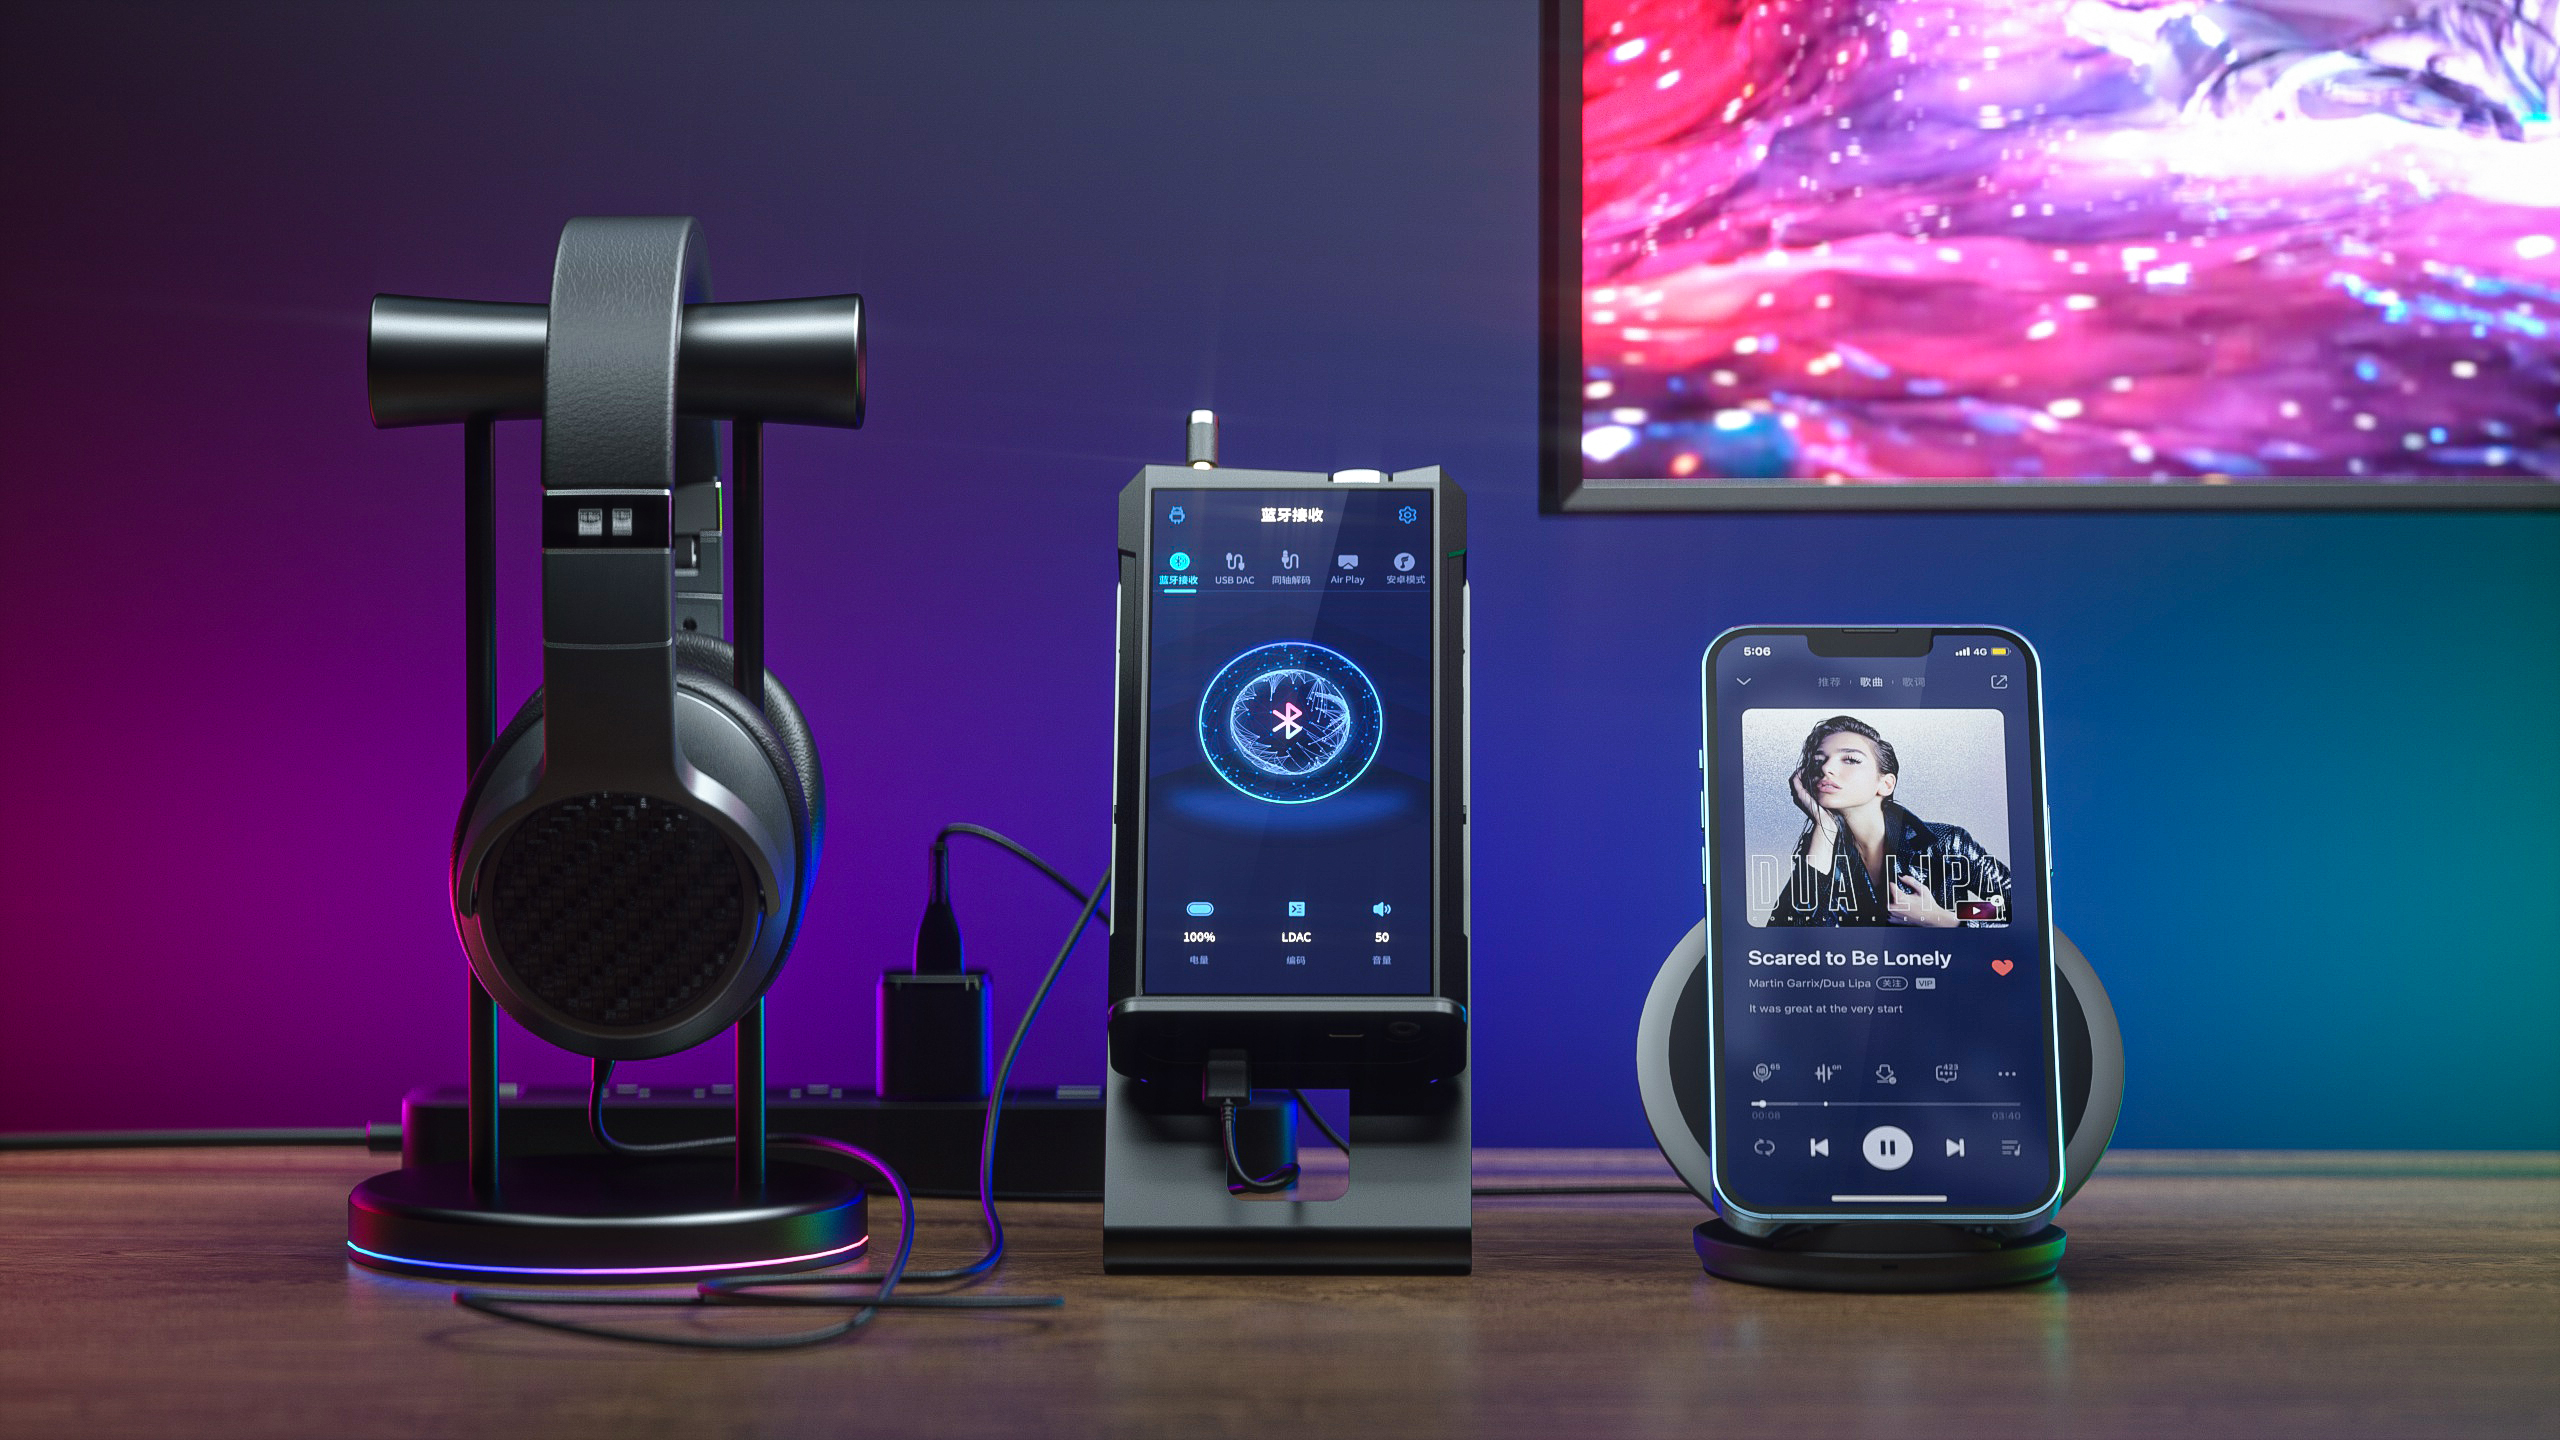 The FiiO M17 digital audio player sitting on a desk with headphones and a smartphone